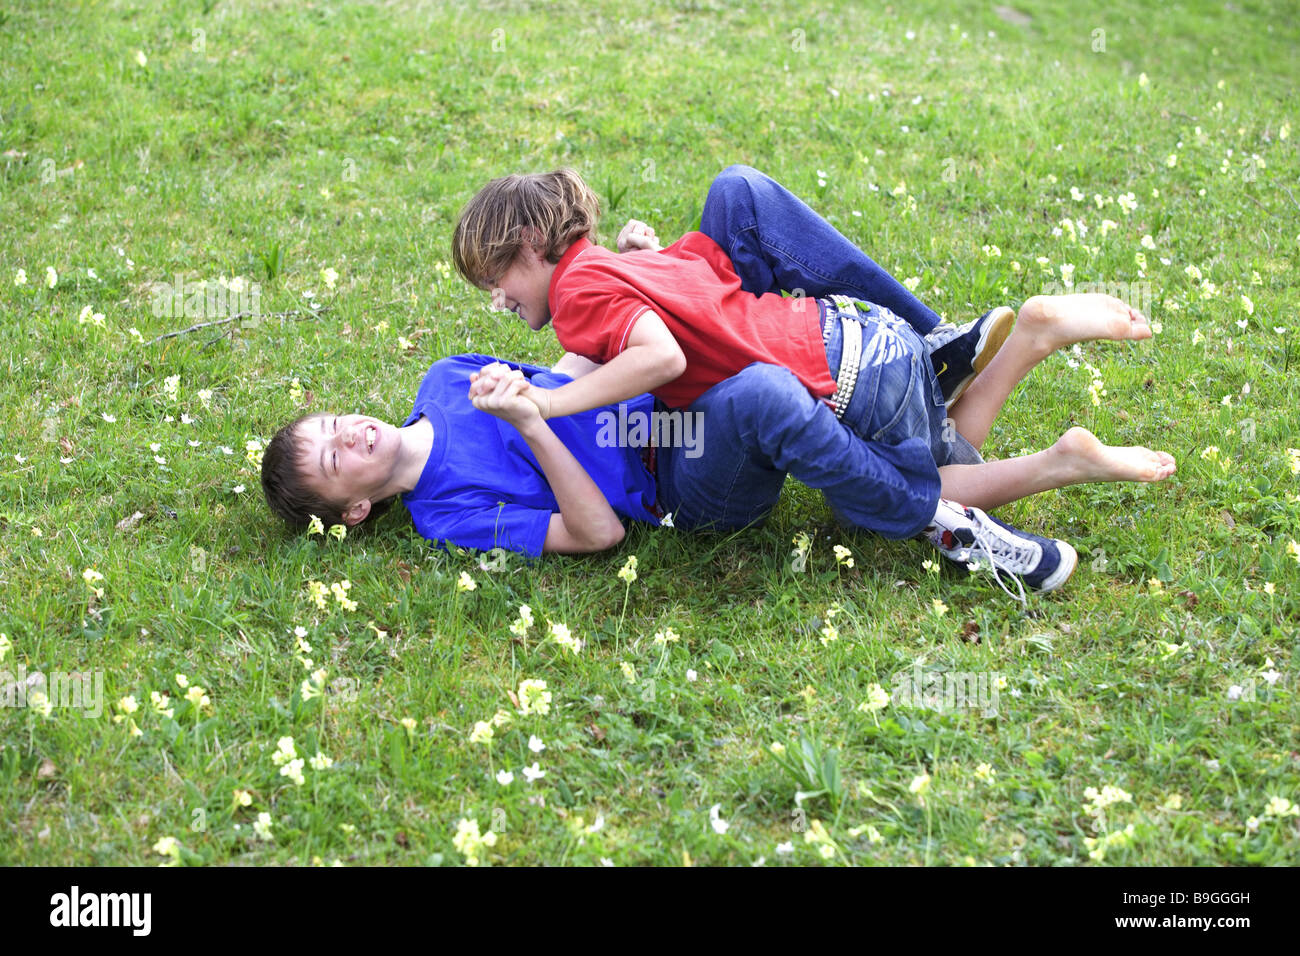 11-13 years fight meadow boys people children two childhood friends enemies dispute wrangling fight rolls full-length rivals Stock Photo